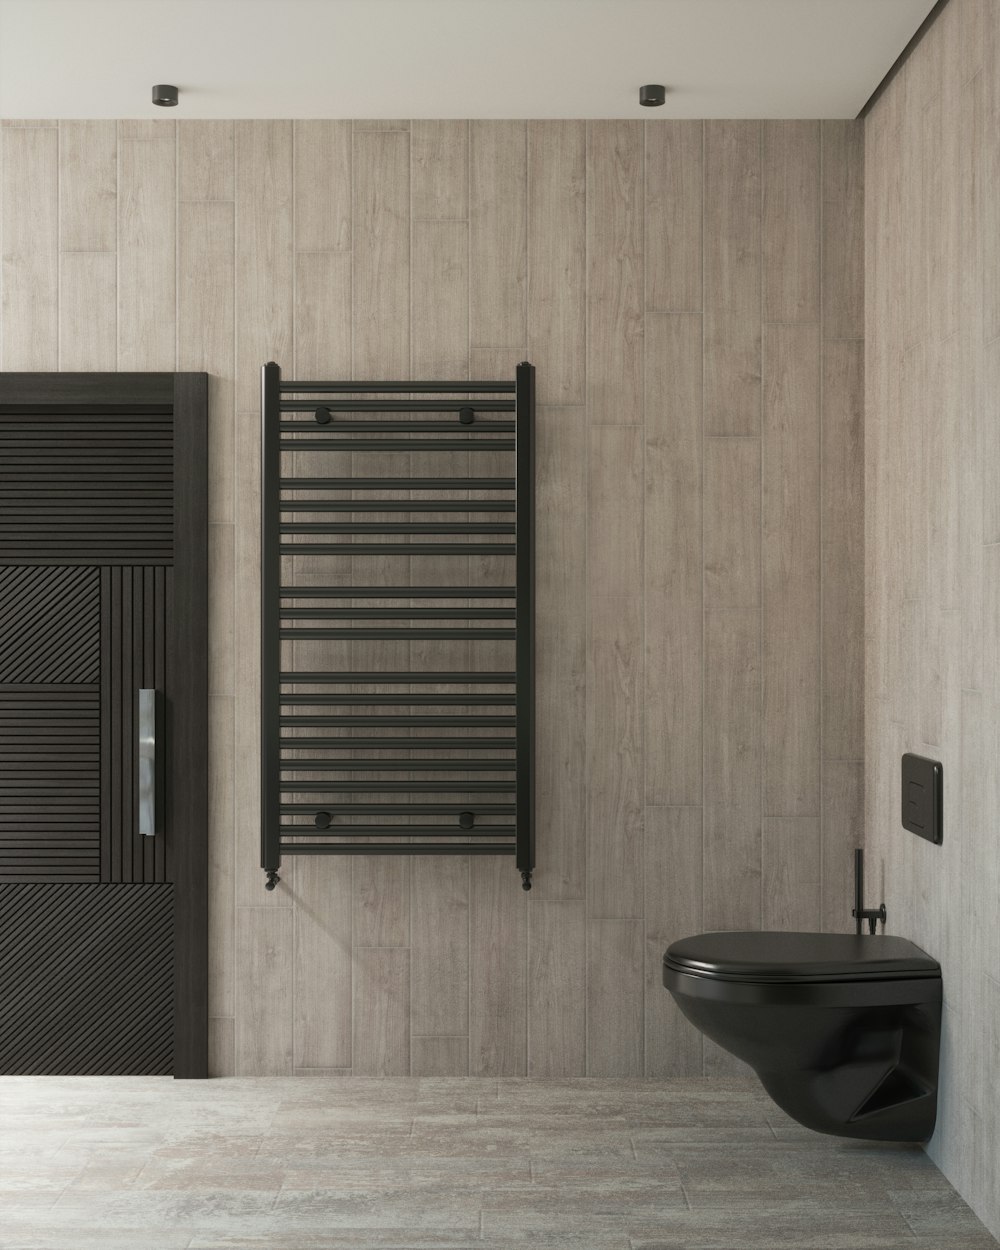 a bathroom with a black toilet and a black radiator